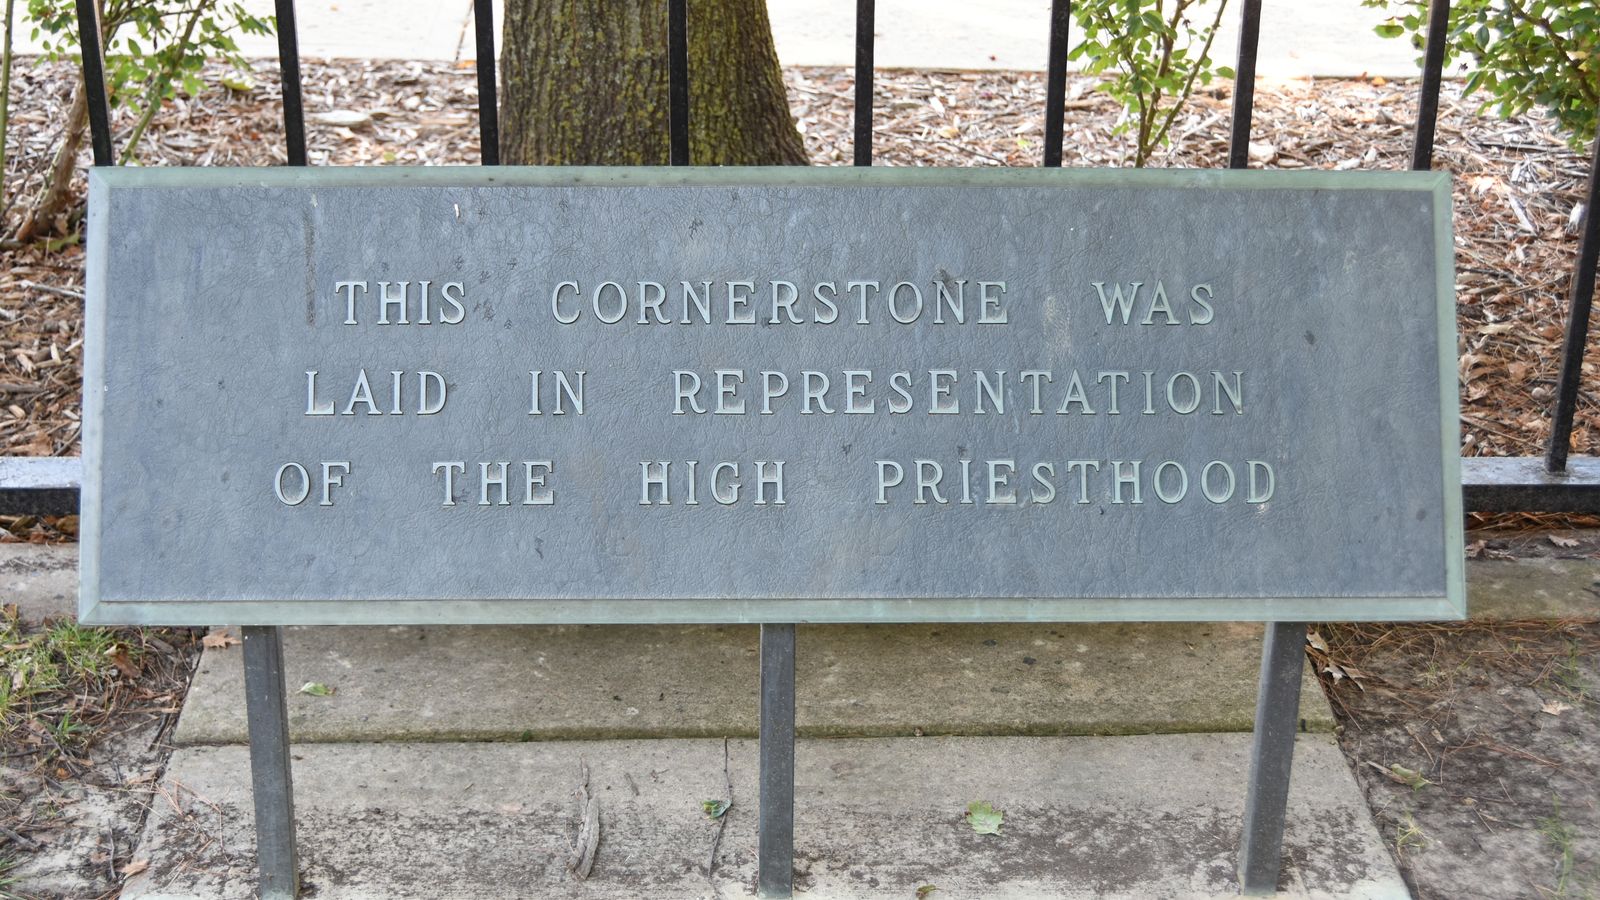 This cornerstone was laid in representation of the high priesthood.